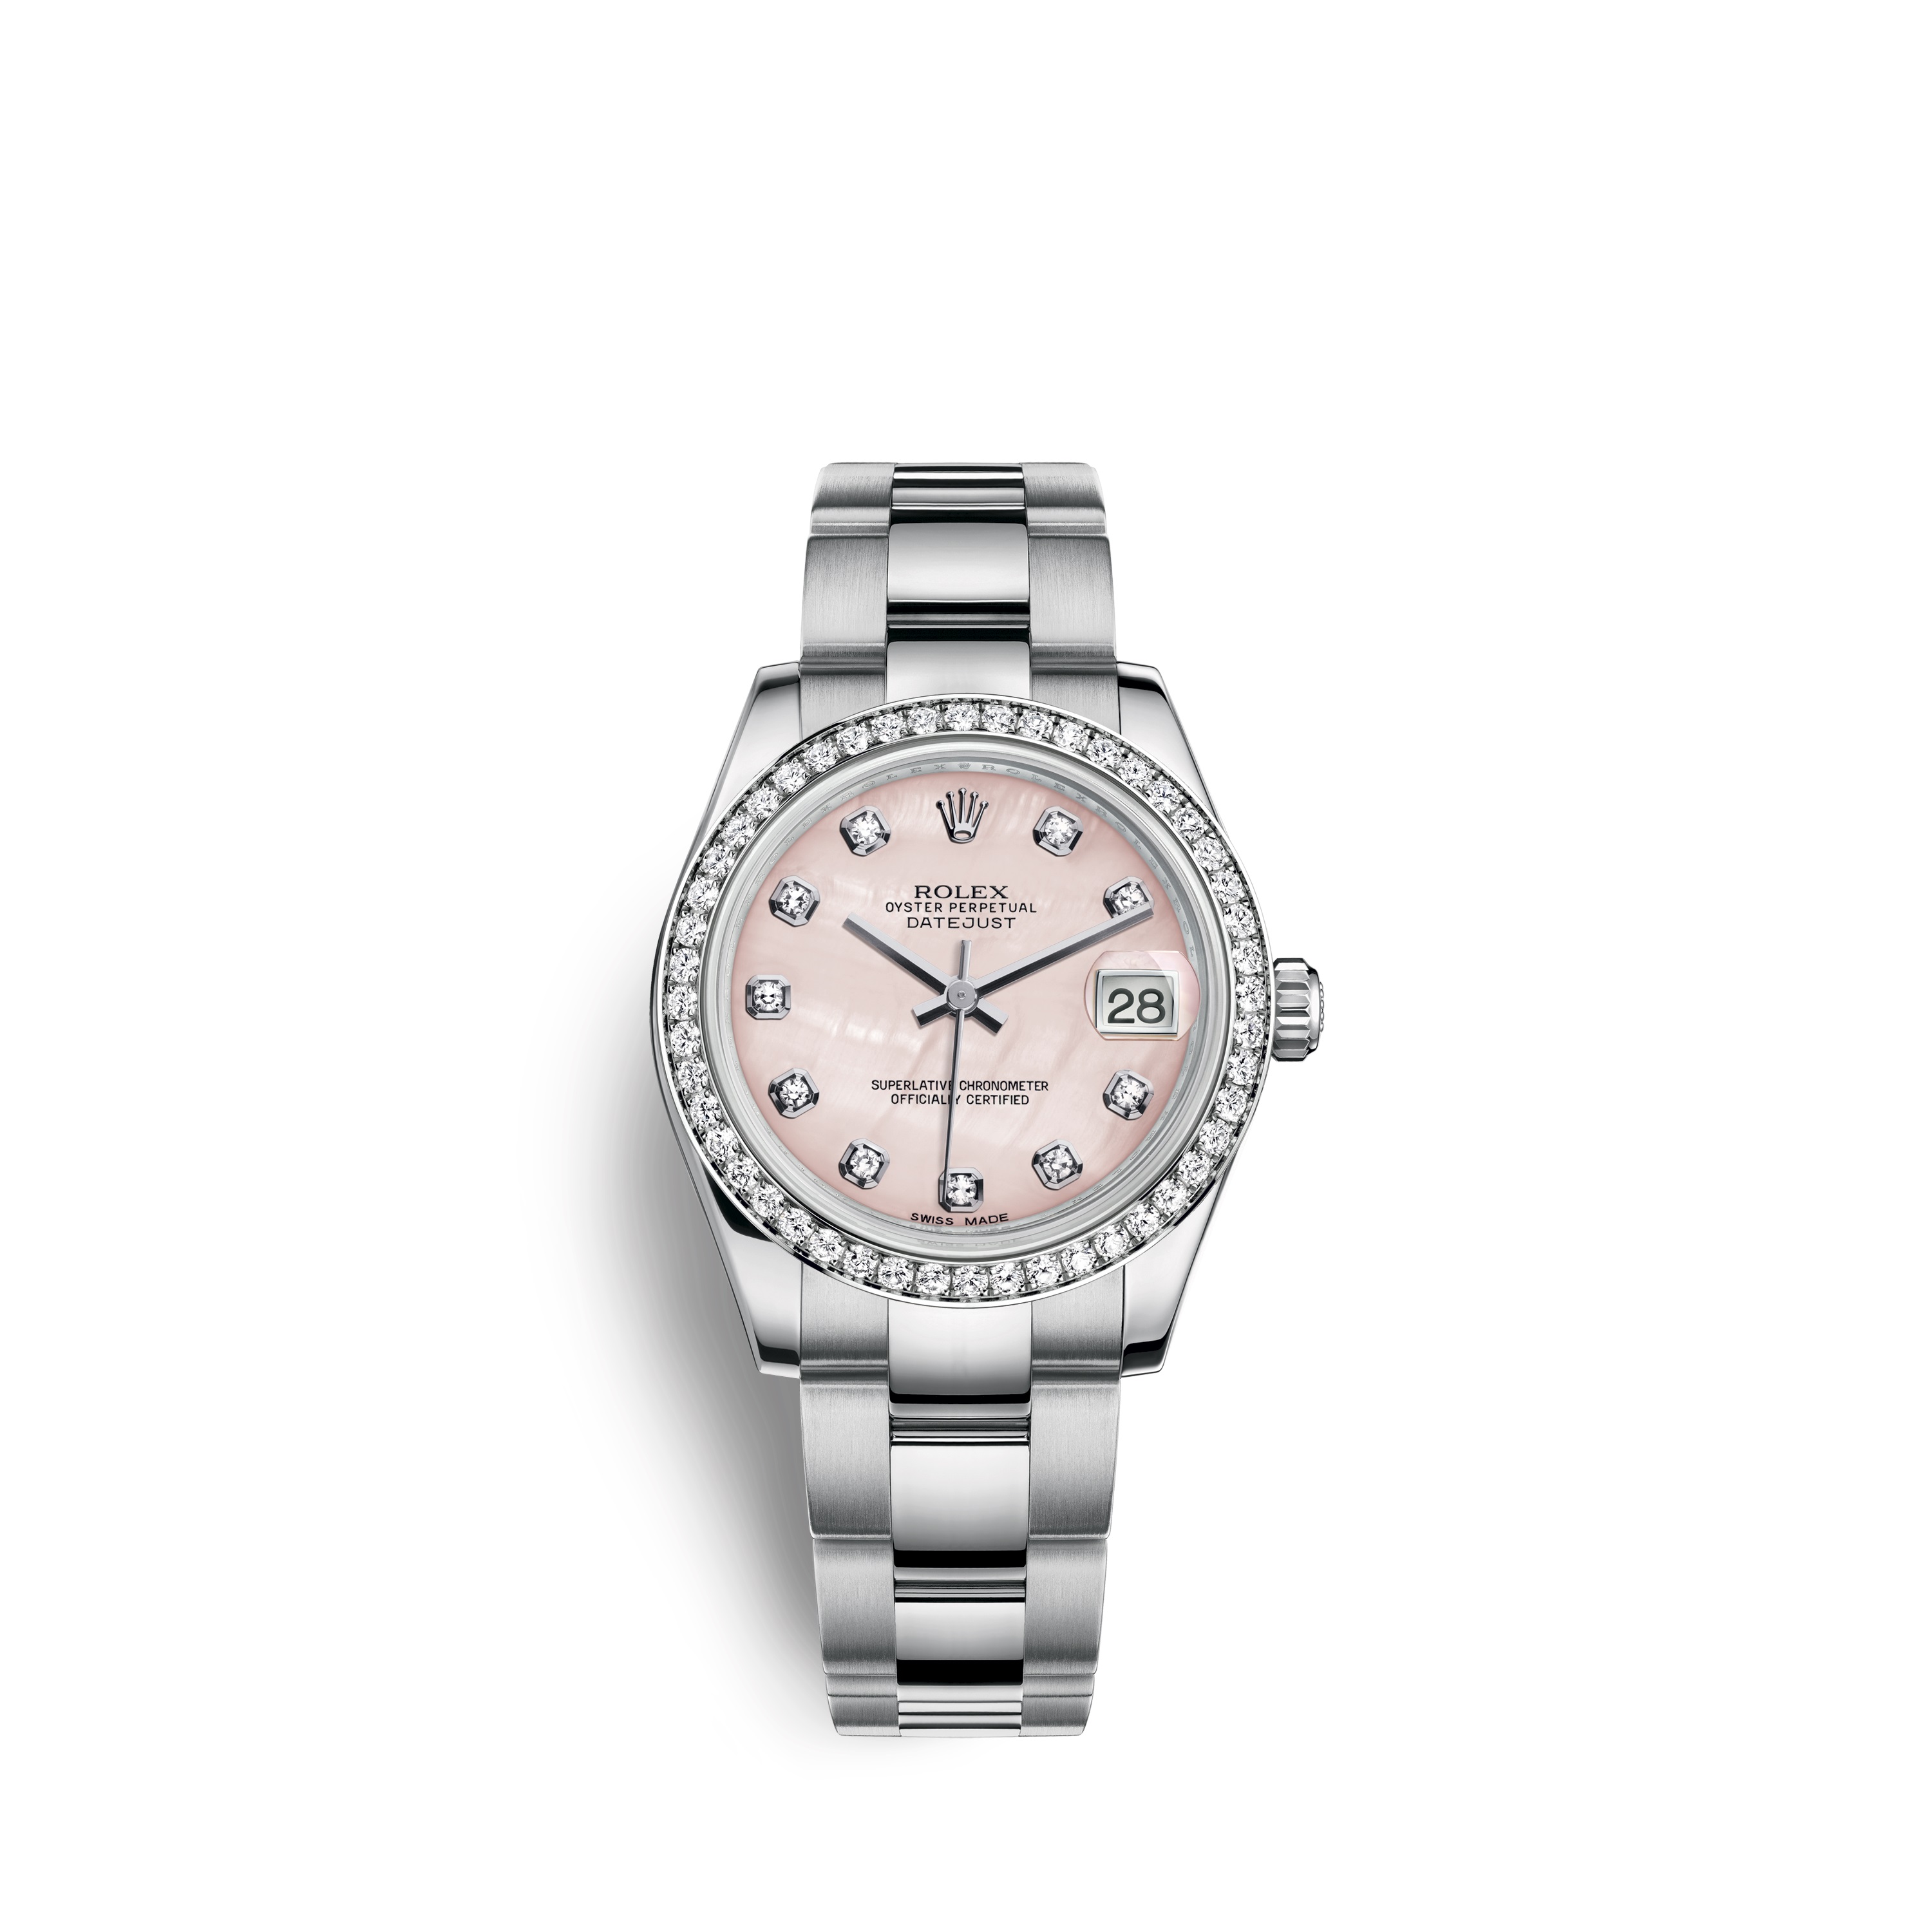 Datejust 31 178384 White Gold & Diamonds Watch (Pink Mother-of-Pearl Set with Diamonds)